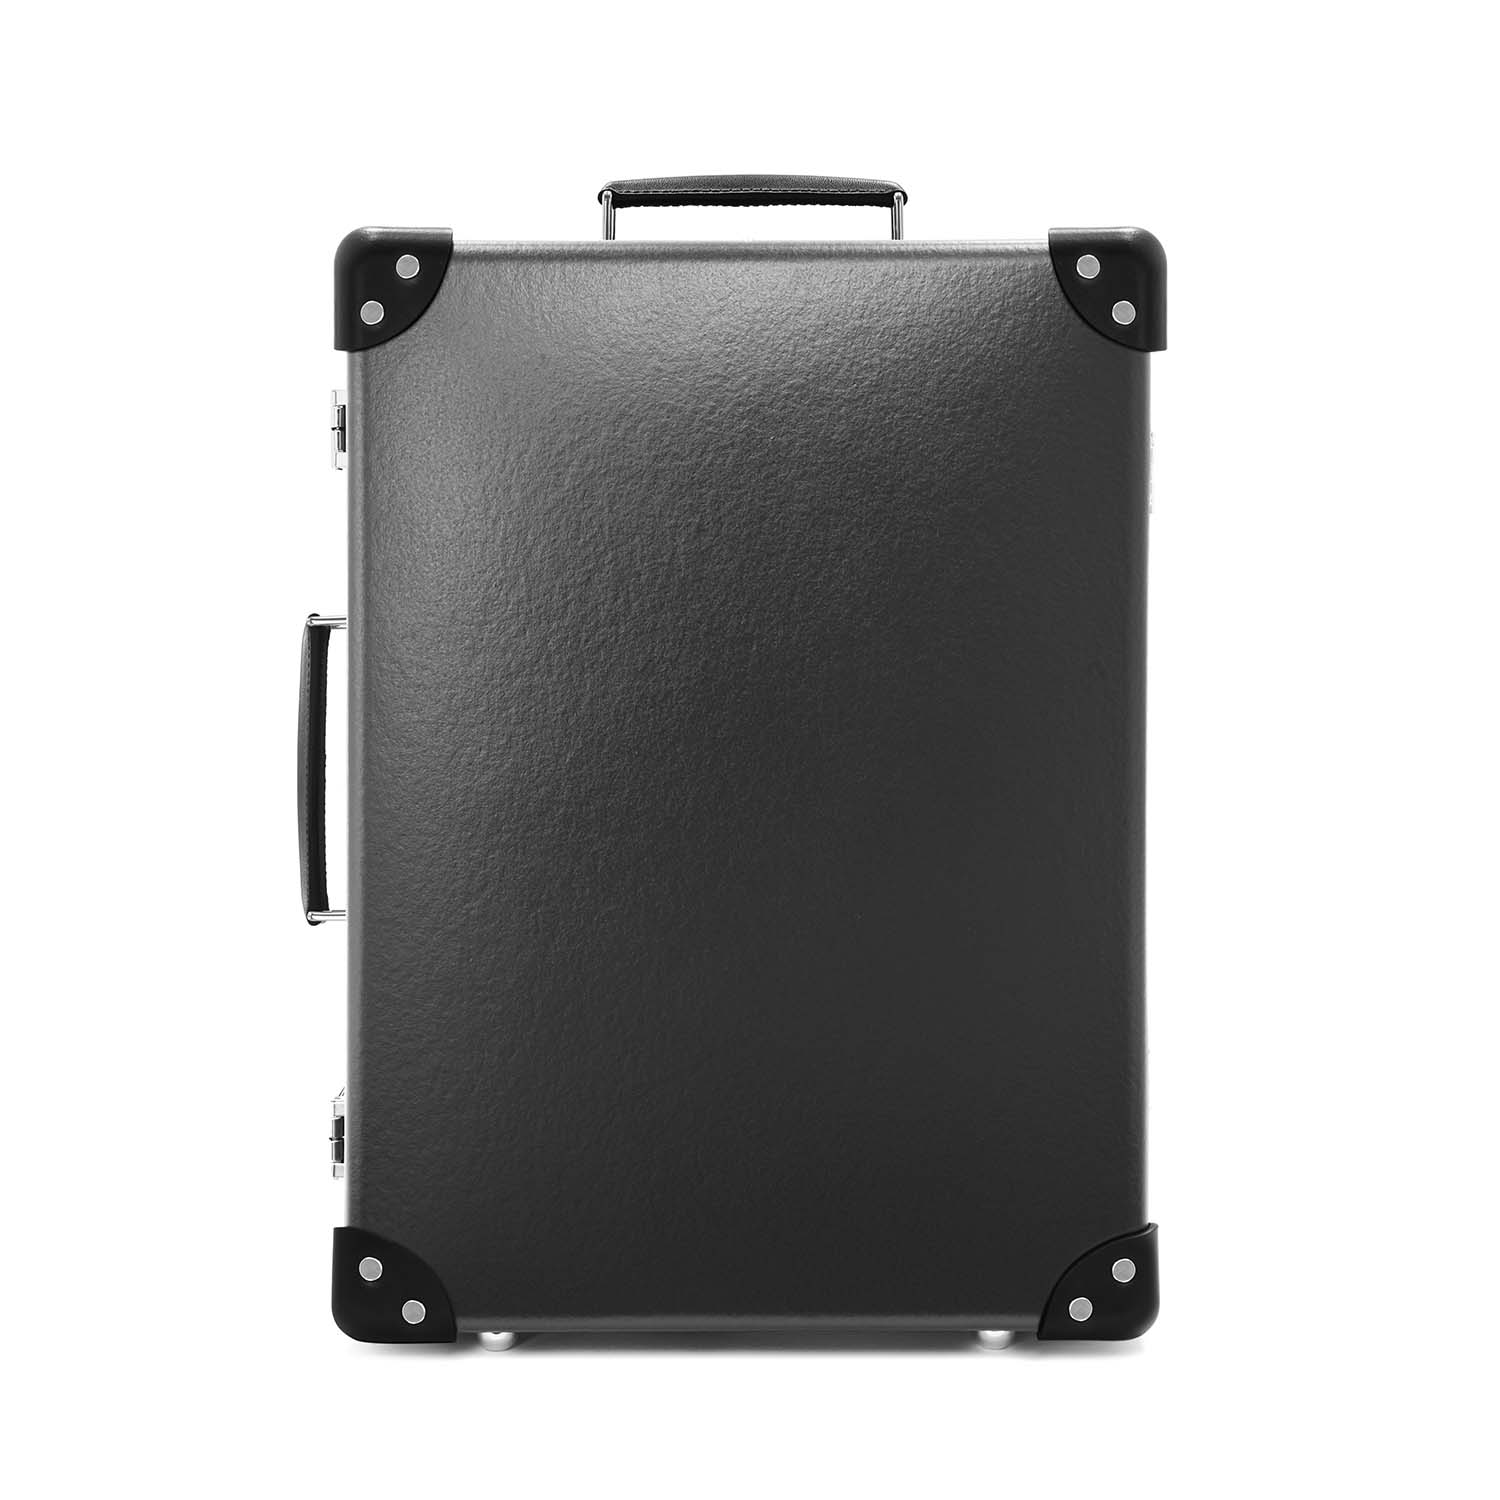 Centenary · Small Carry-On - 2 Wheels | Charcoal/Black/Chrome